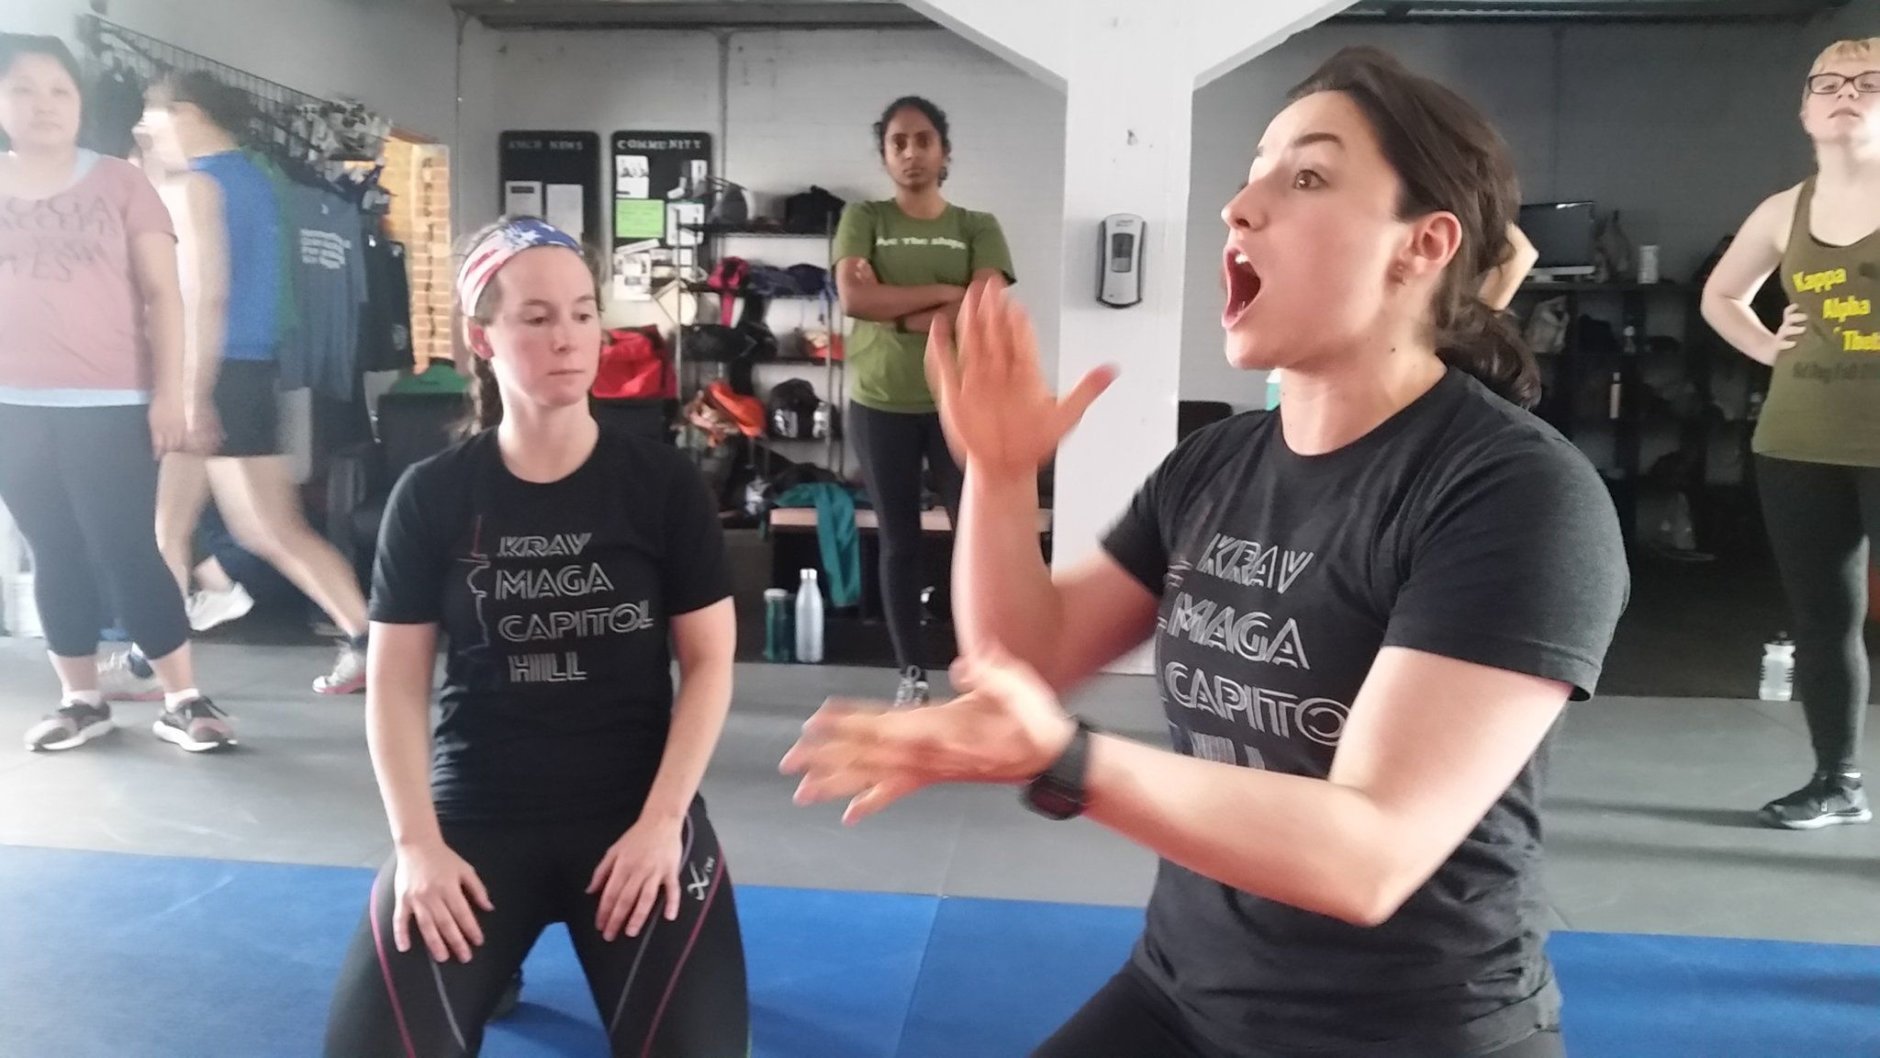 Jeff Marcus, general manager of Krav Maga Capitol Hill, said they raised about $2,000, all of which is being donated to the D.C. Rape Crisis Center. (WTOP/Kathy Stewart)